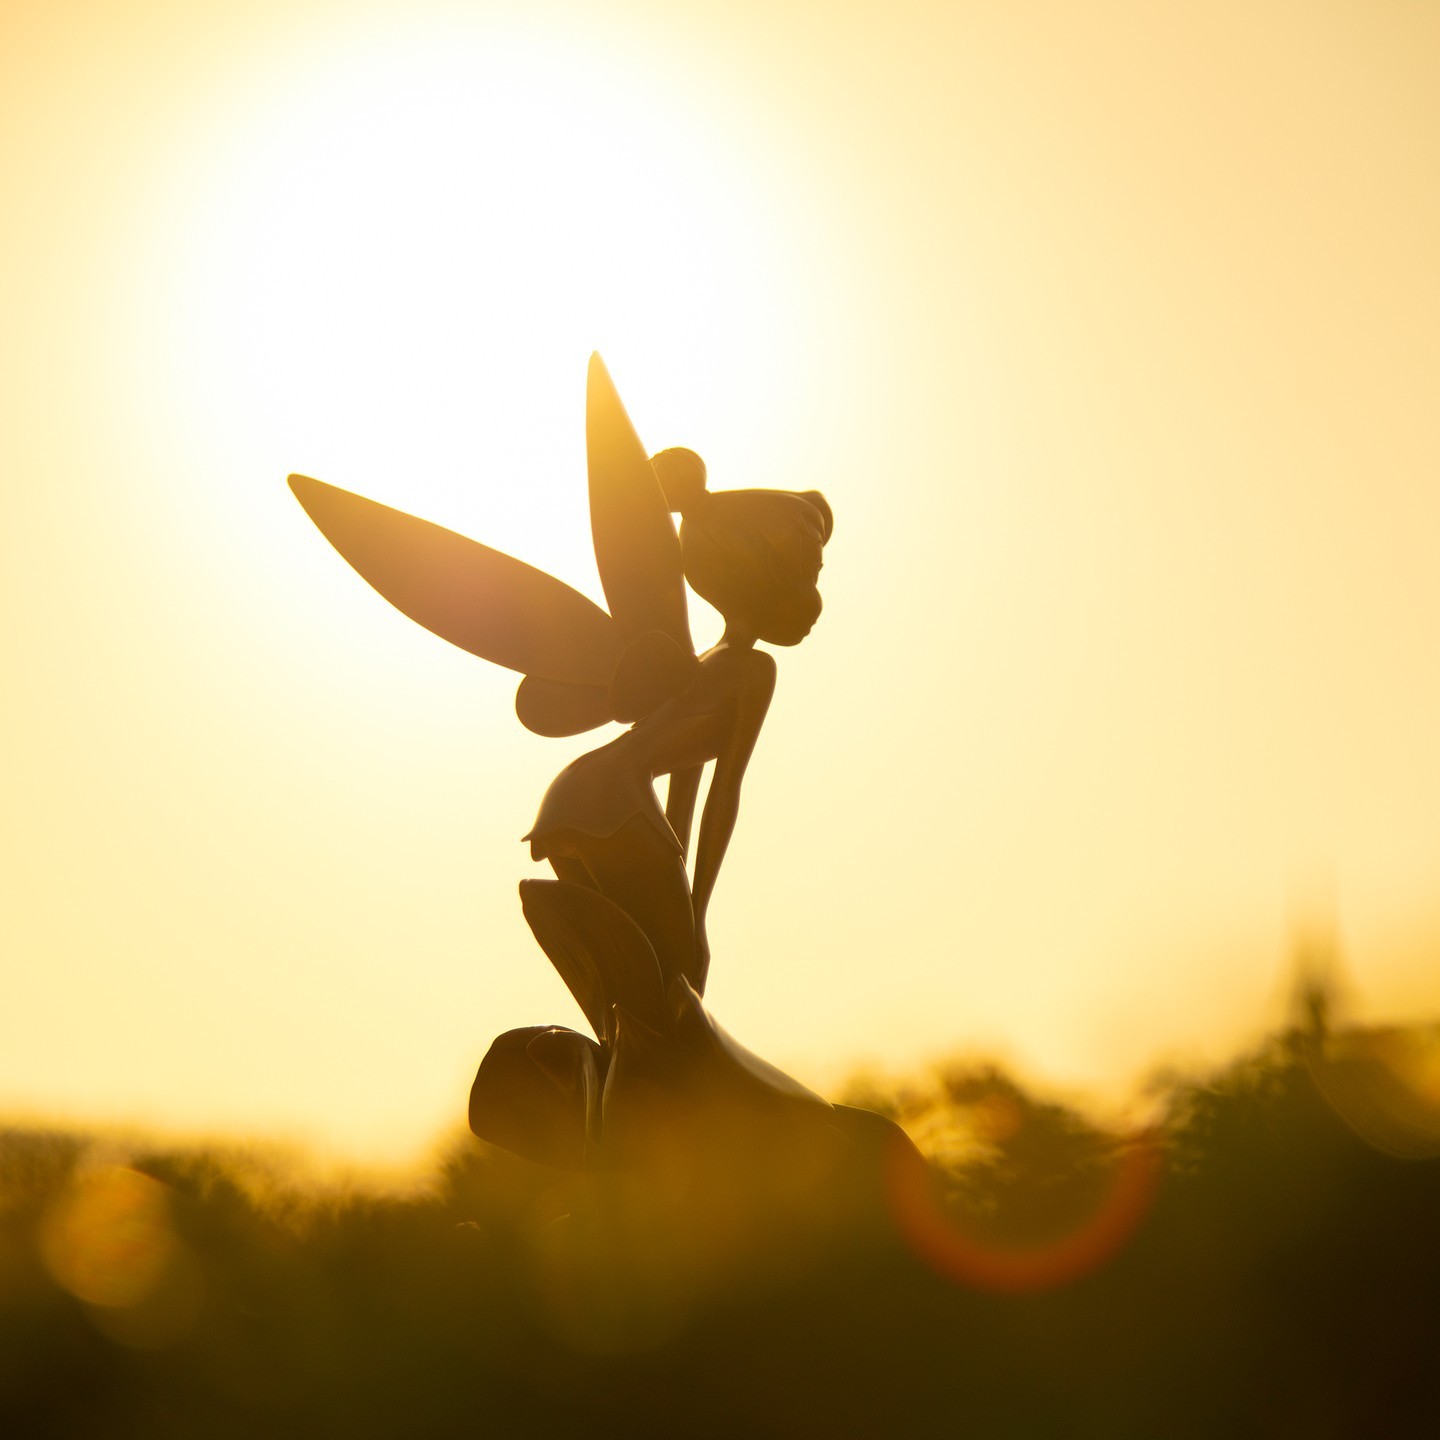 A perfect silhouette at sunset.
どんな1日だったかな？
#sunset #tinkerbell #tokyodisneyland...のイメージ